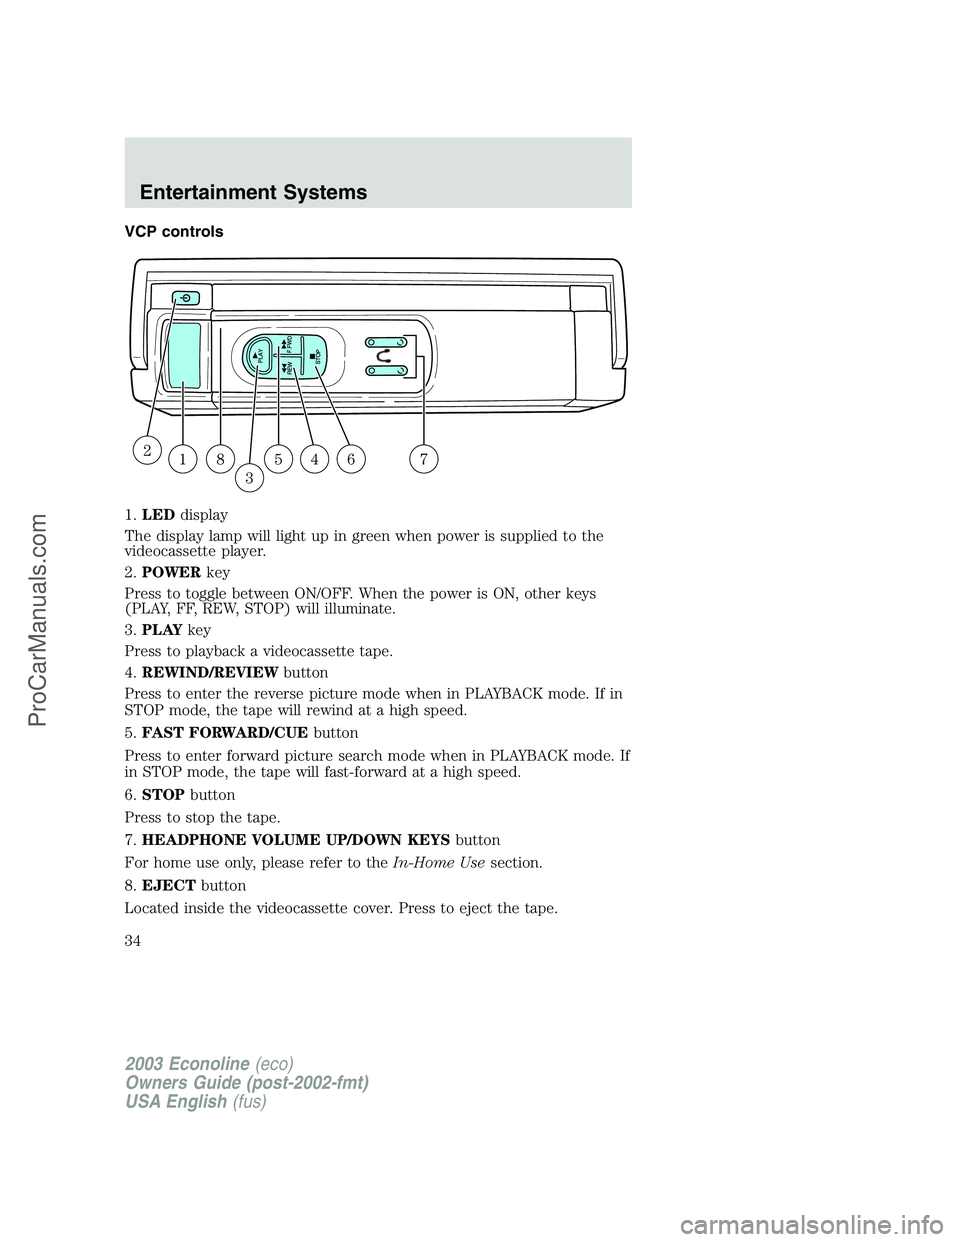 FORD ECONOLINE 2003  Owners Manual VCP controls
1.LEDdisplay
The display lamp will light up in green when power is supplied to the
videocassette player.
2.POWERkey
Press to toggle between ON/OFF. When the power is ON, other keys
(PLAY,